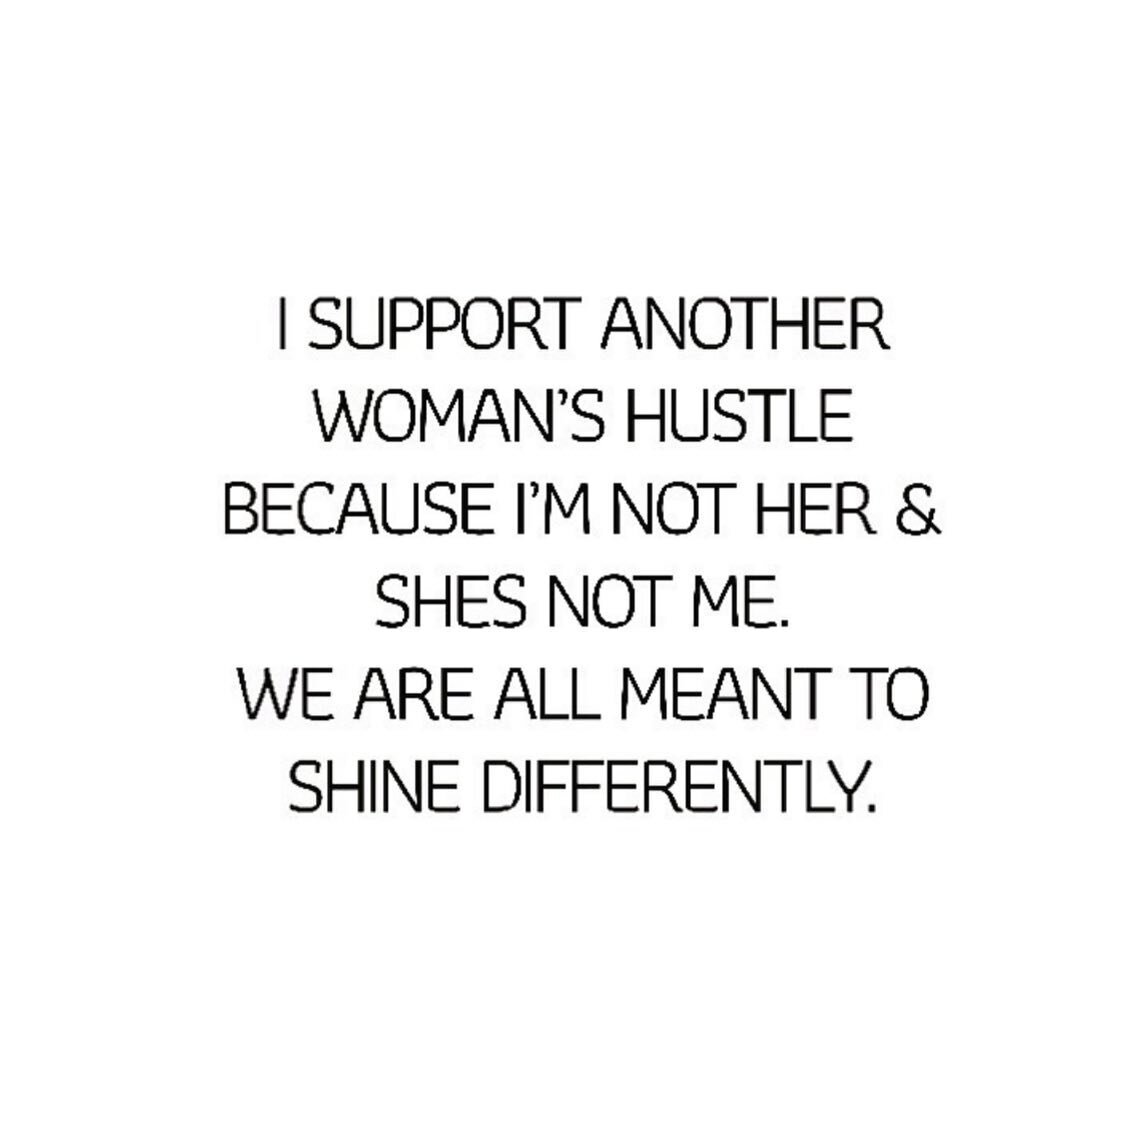 In an industry full of business beauty boss babes, we need to have each others backs. (I got yours if you got mine?) 😘

It&rsquo;s not about competition, it&rsquo;s about woman supporting woman, it truly feels good to be able to have that support of